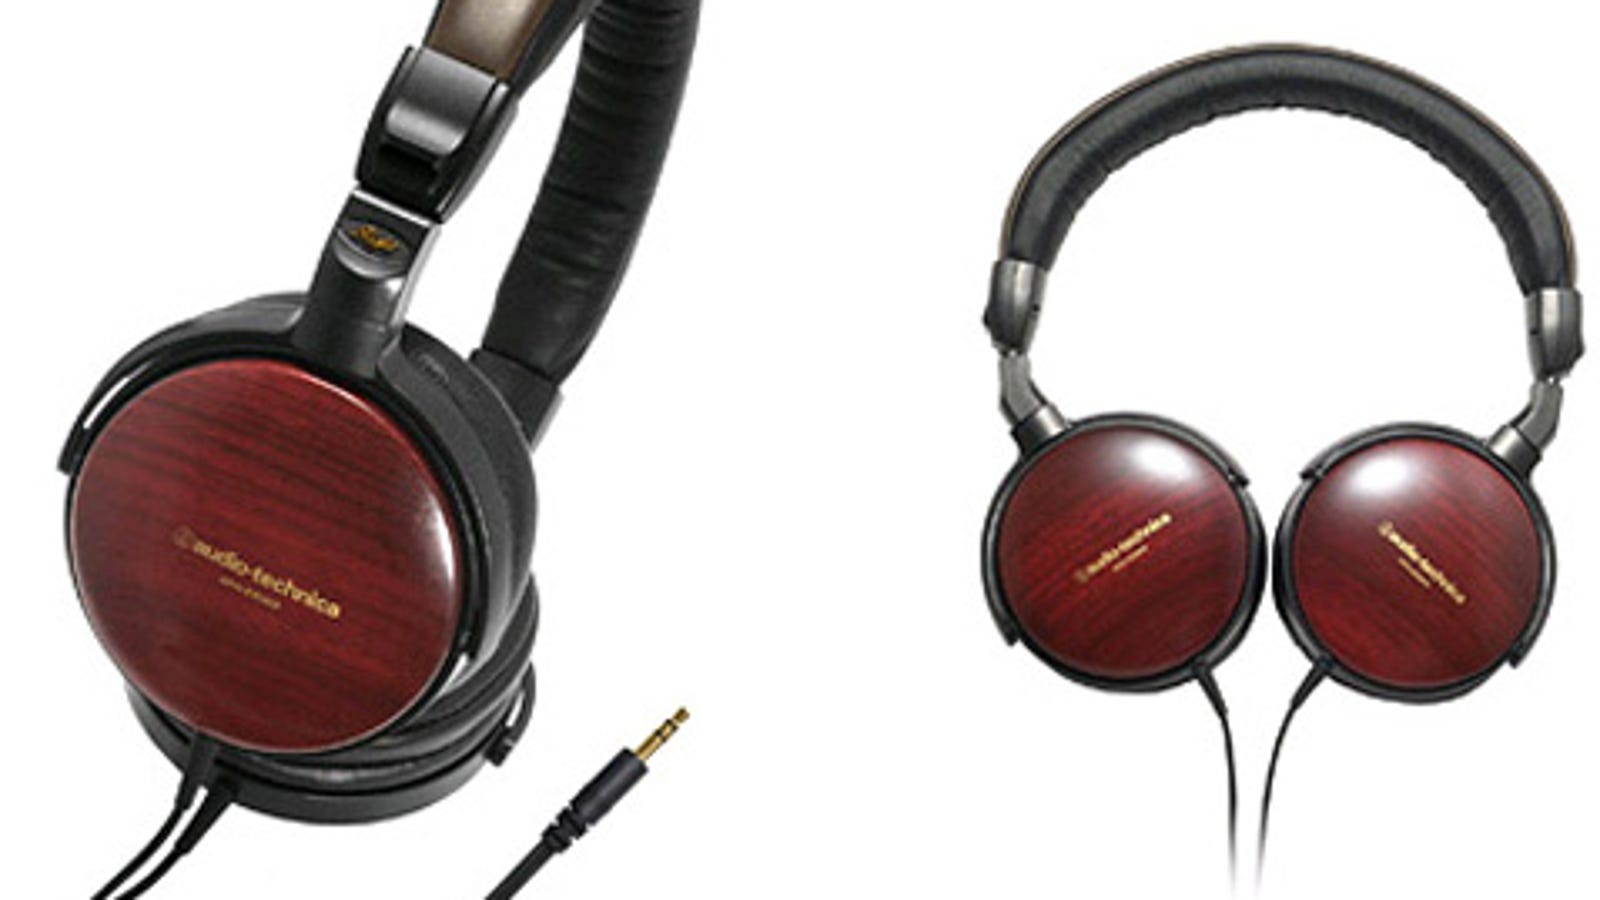 Audio Technica S Ath Esw9 Cans Give You Wood